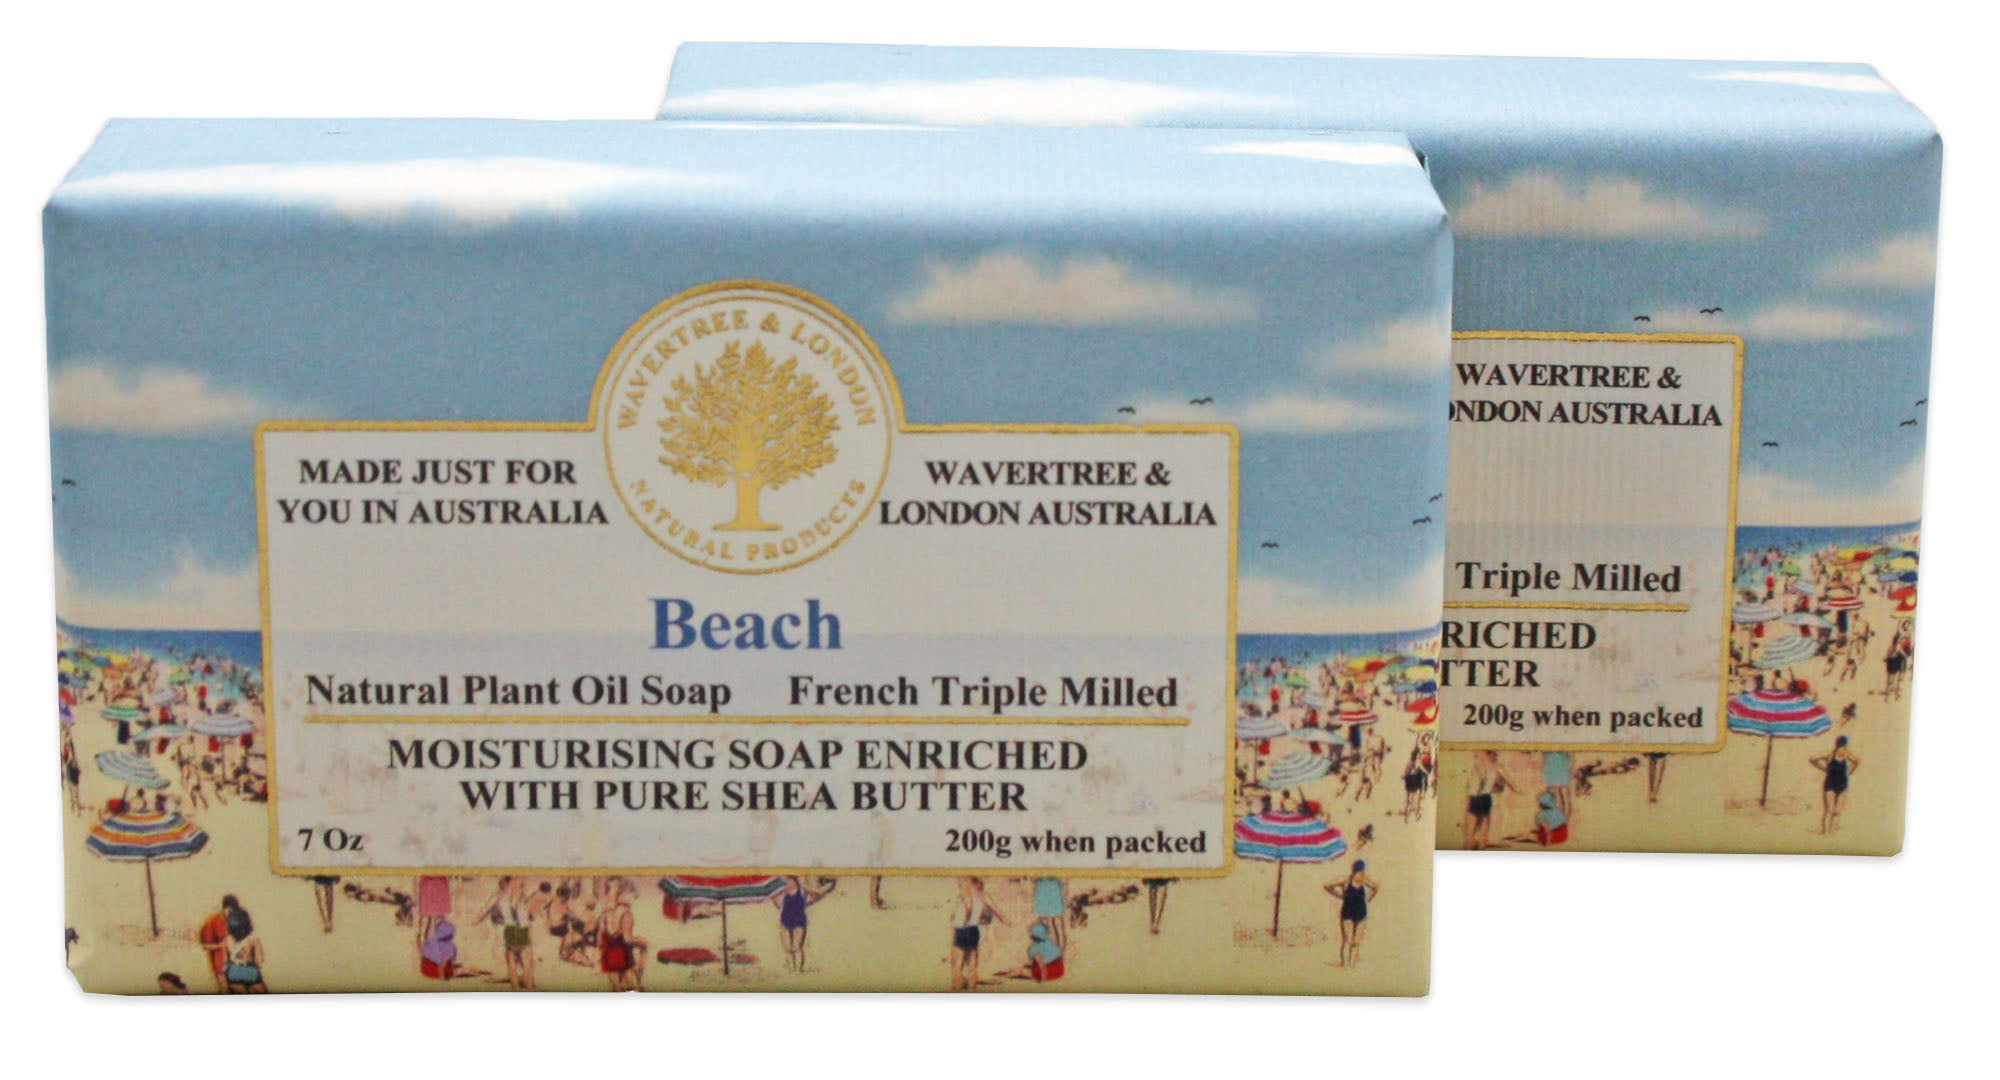 Wavertree & London Beach (2 Bars), 7oz Moisturizing Natural Soap Bar, French -Milled and enriched with Shea Butter